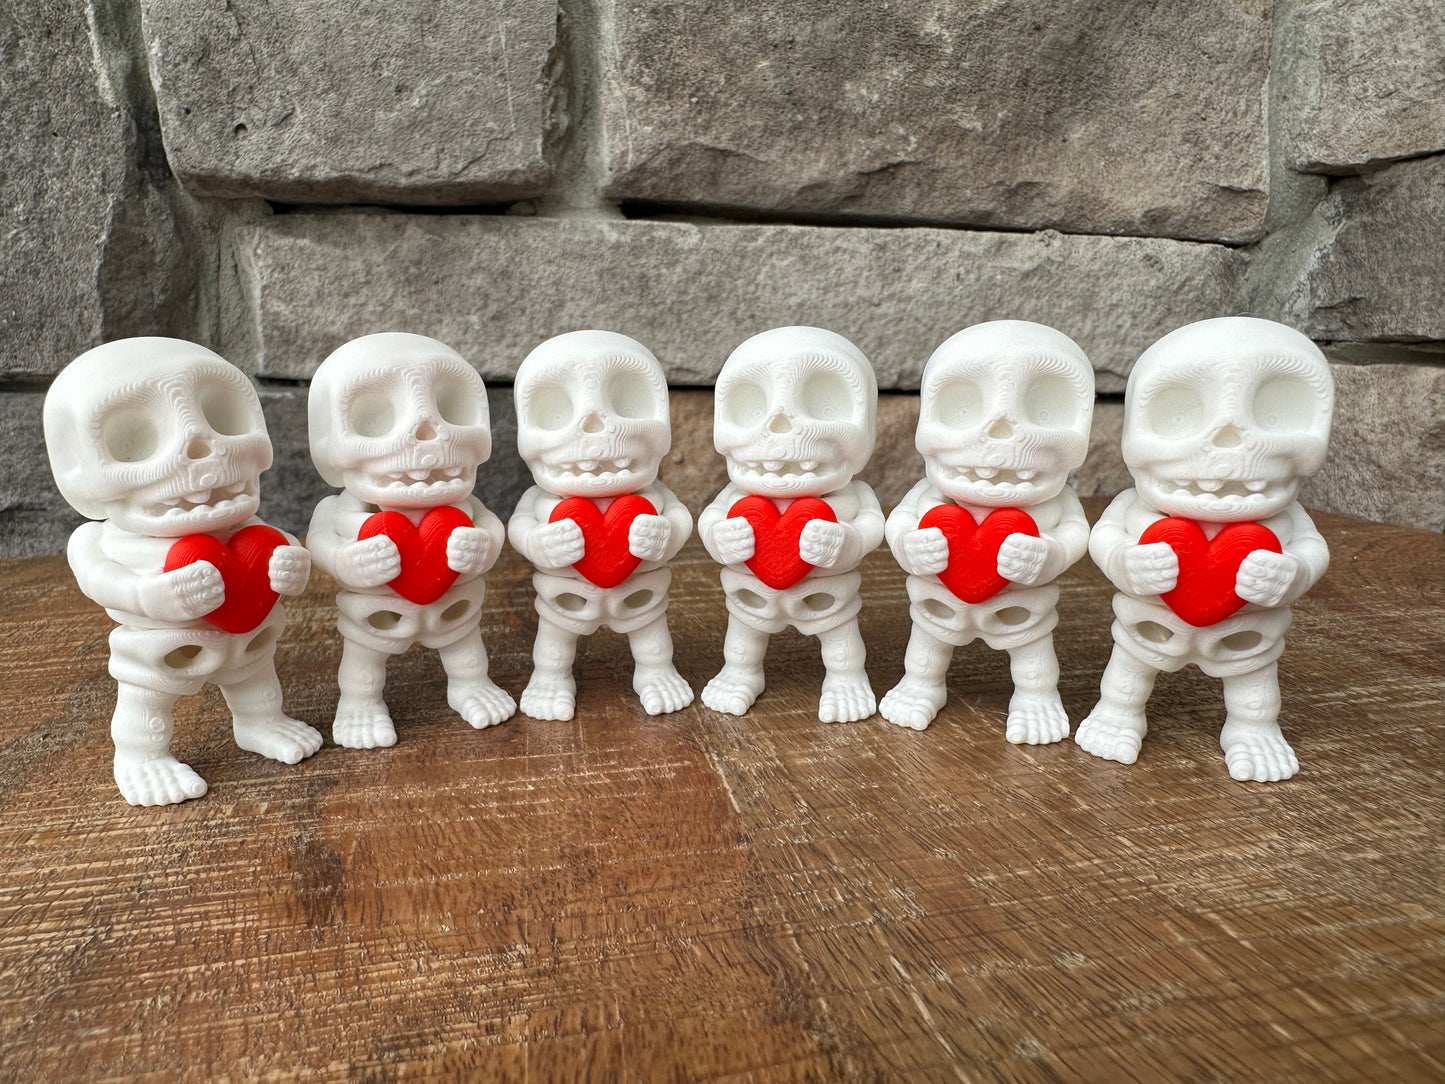 Tiny Skeleton with Heart | Tiny Collection | Multi Filament | 3D Printed | Articulated Flexible | Custom Fidget Toy